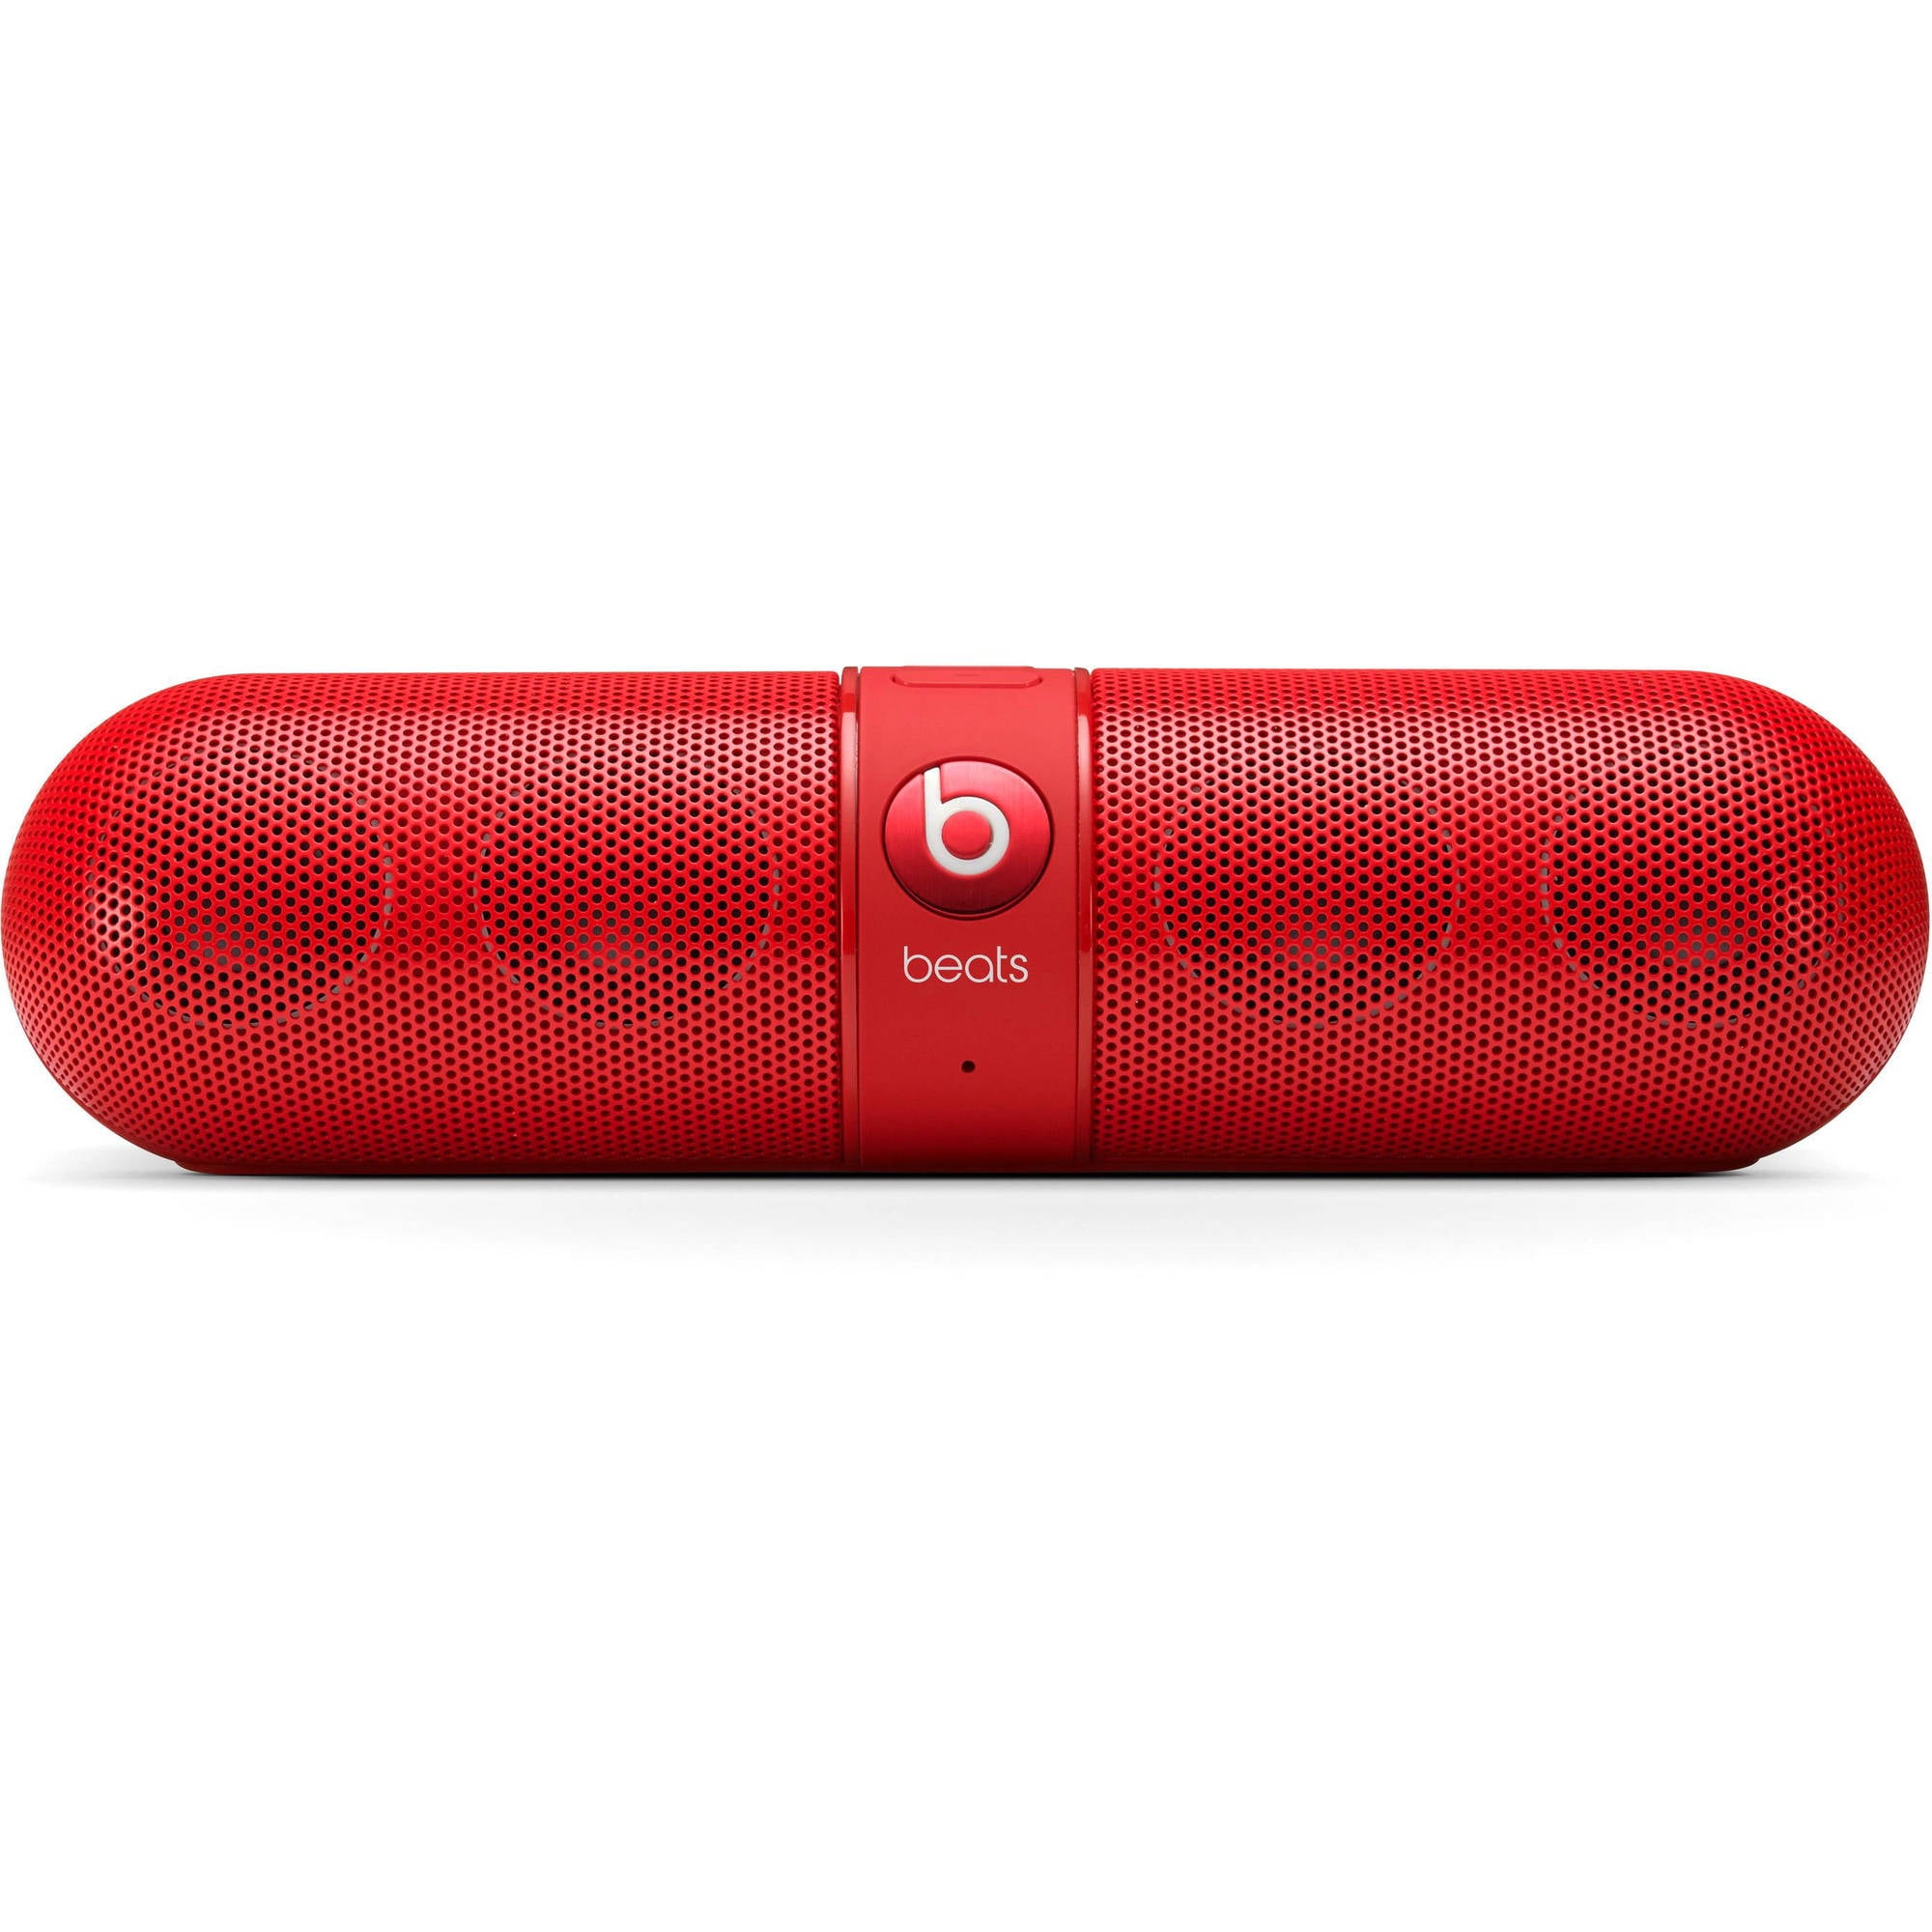 Refurbished Beats by Dr. Dre Pill 2.0 